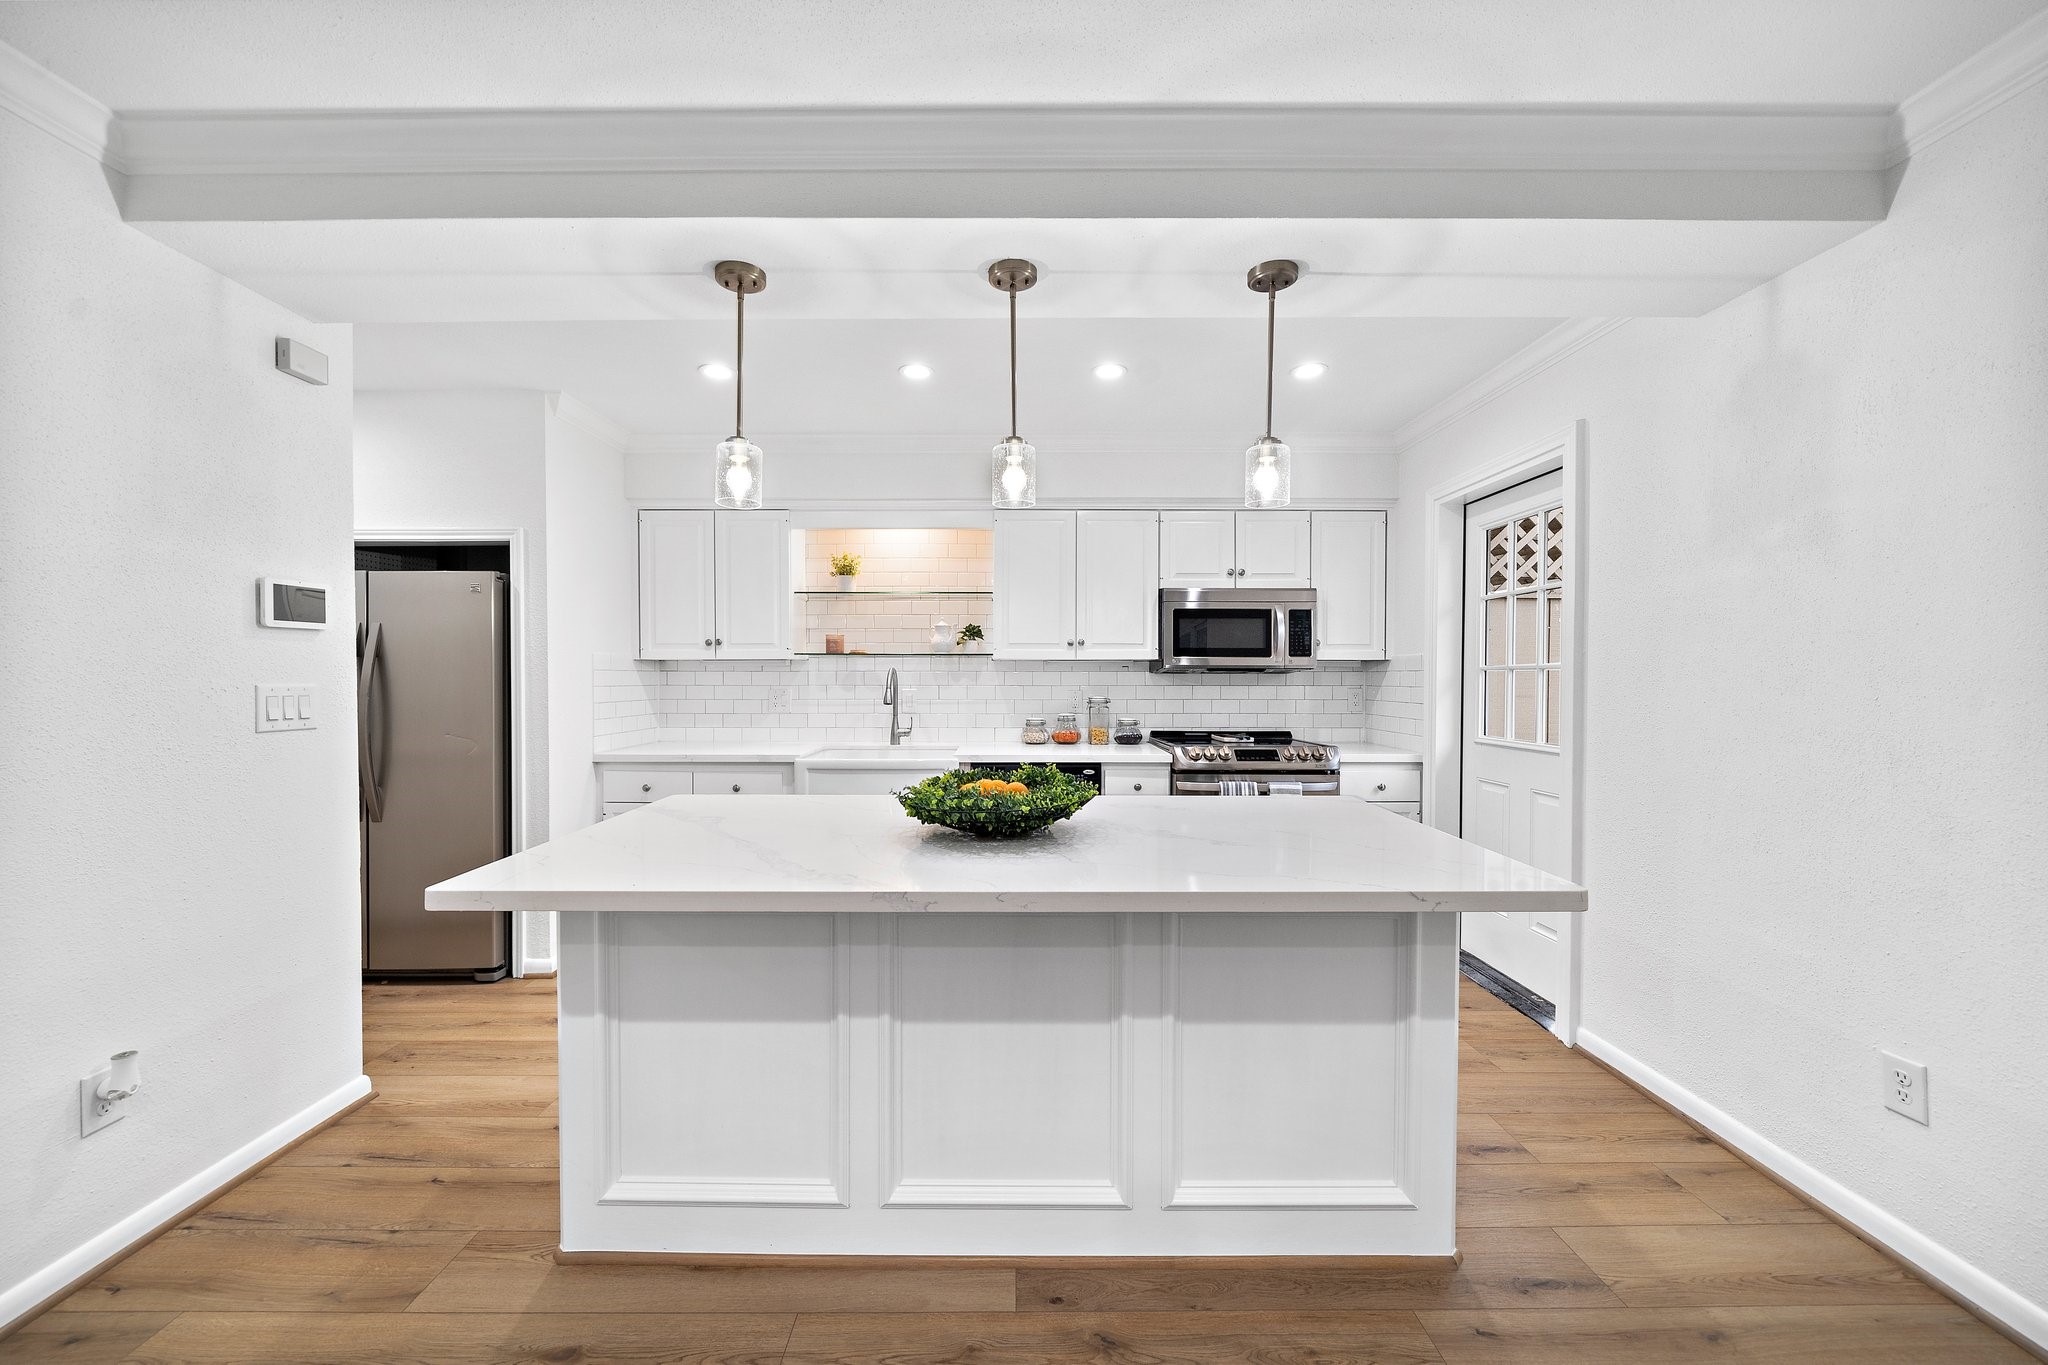 Beautiful bright kitchen with abundance of working space and storage. Accented with pendant lights. This space will be an oasis for everyone who loves to cook and entertain.